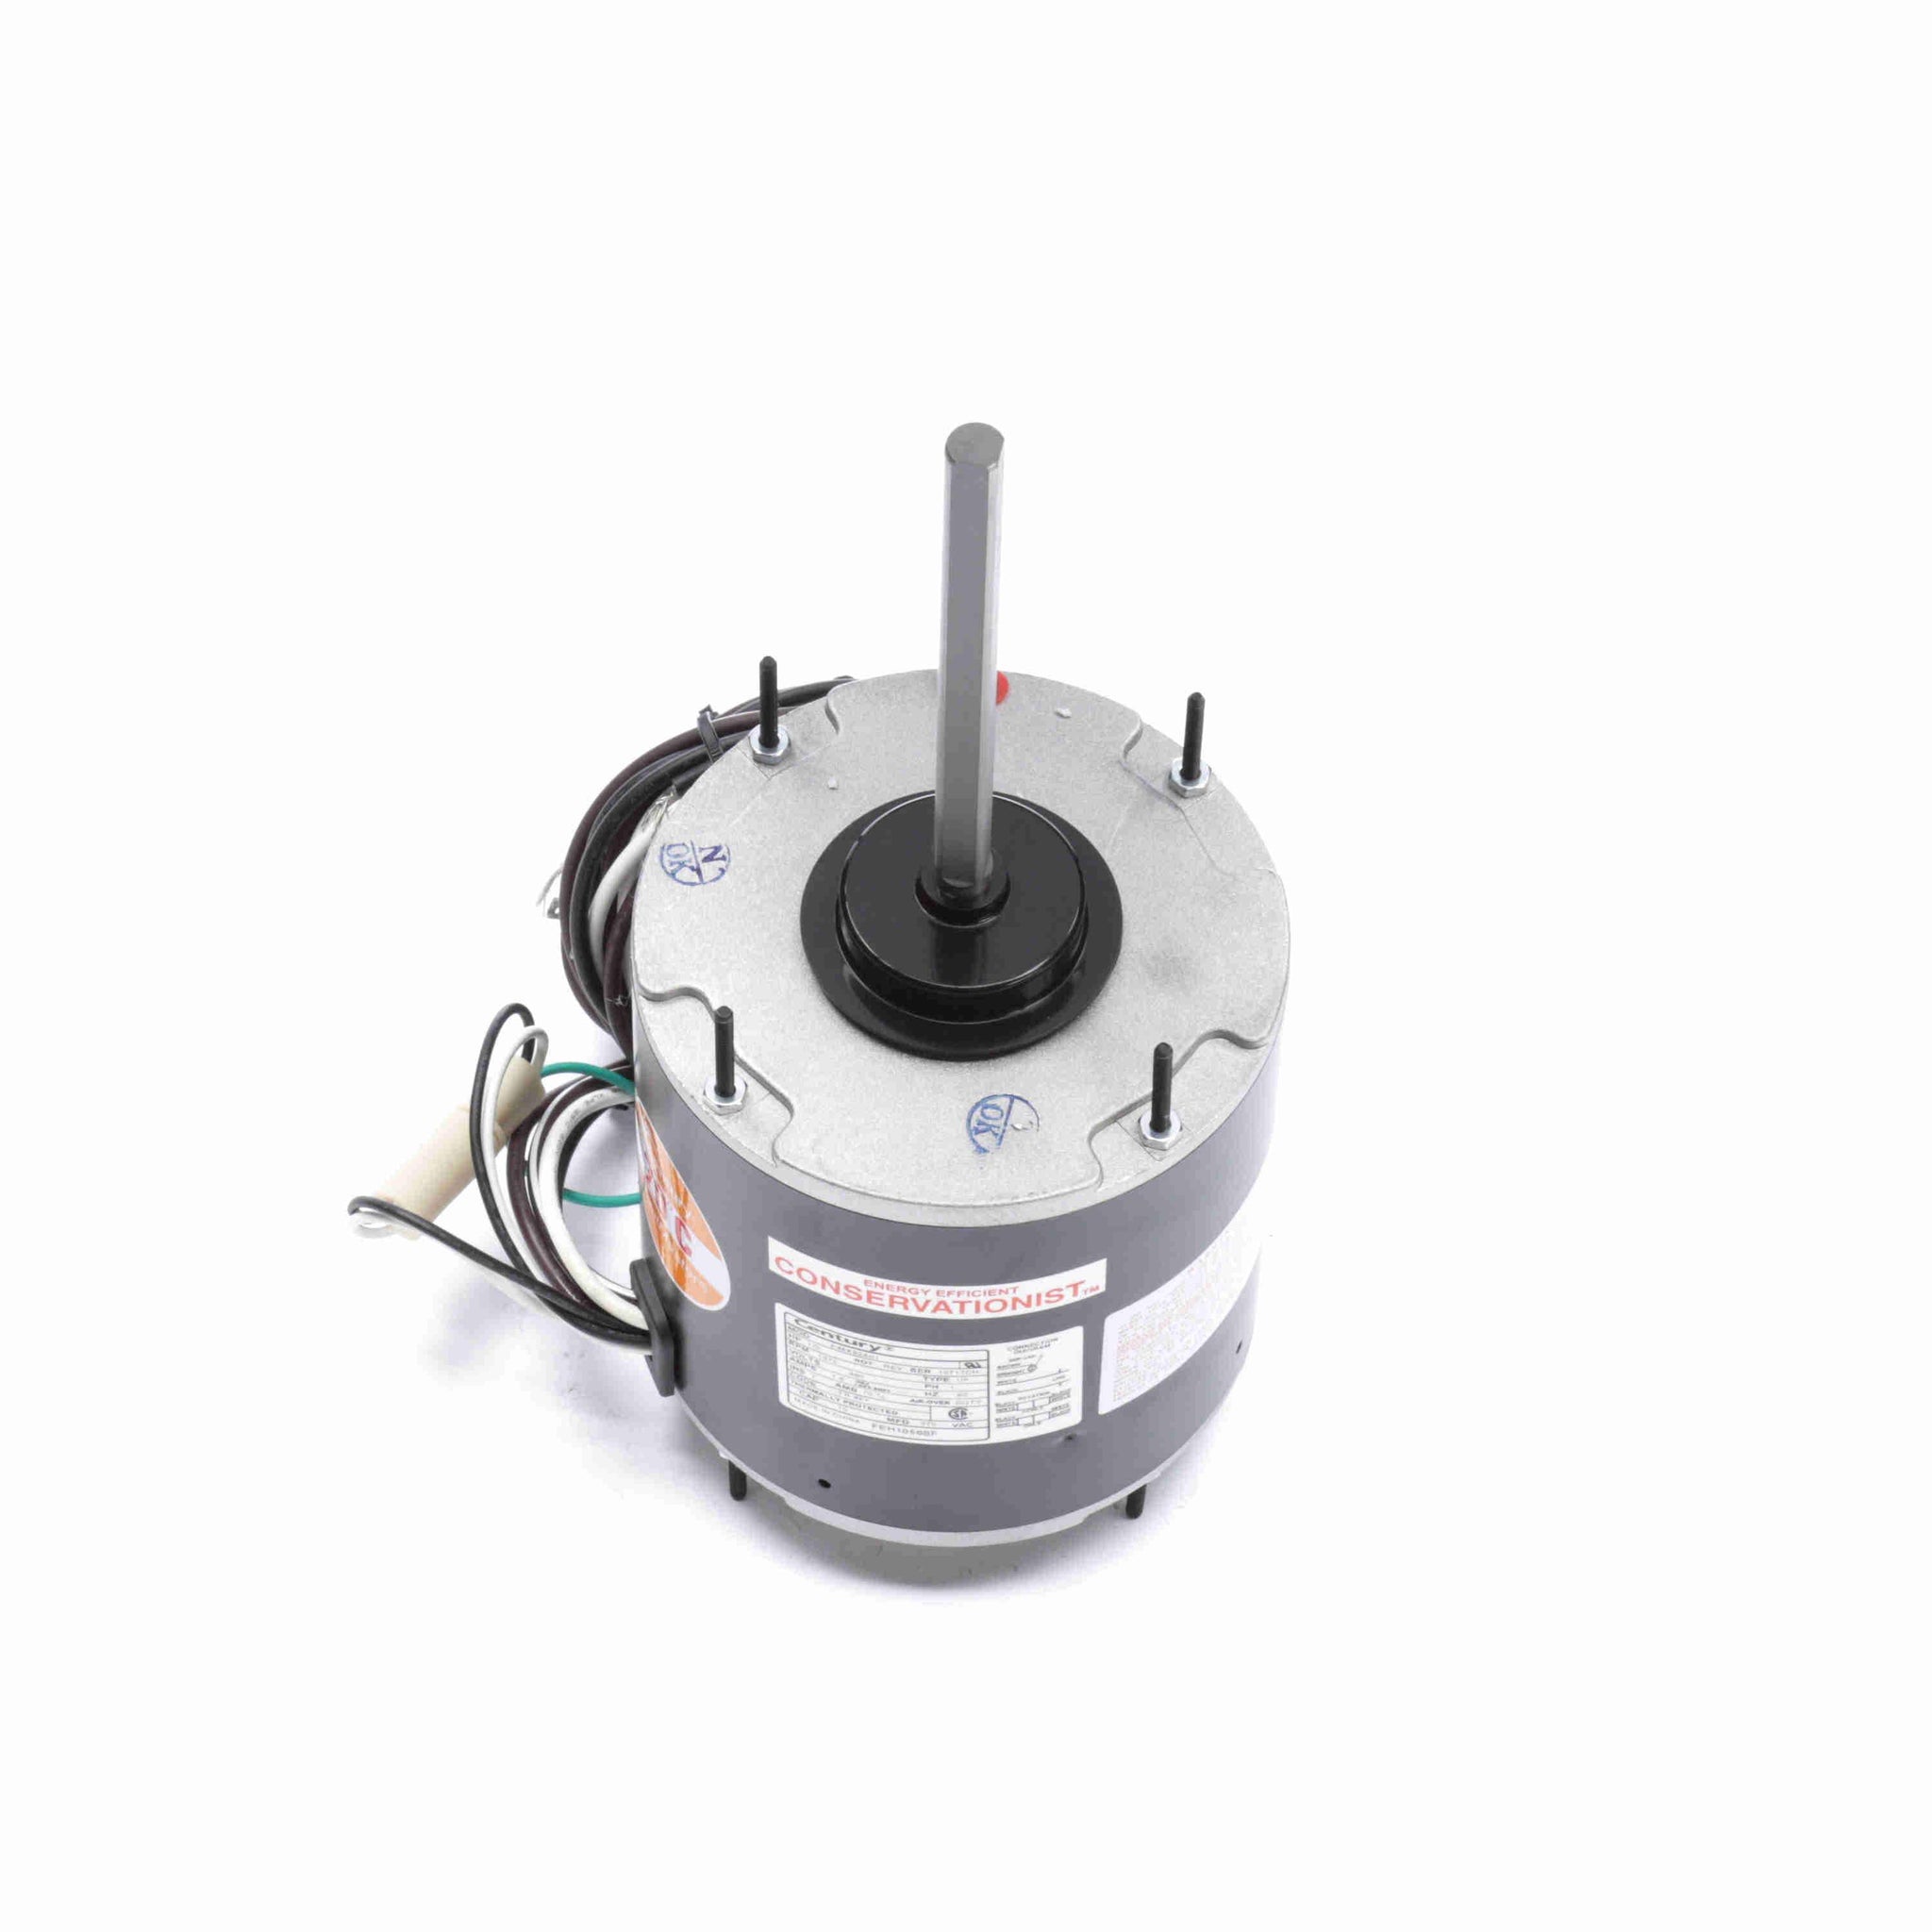 FEH1056SF - 1/2 HP Condenser Fan Motor, 1075 RPM, 460 Volts, 48 Frame, TEAO - Hardware & Moreee